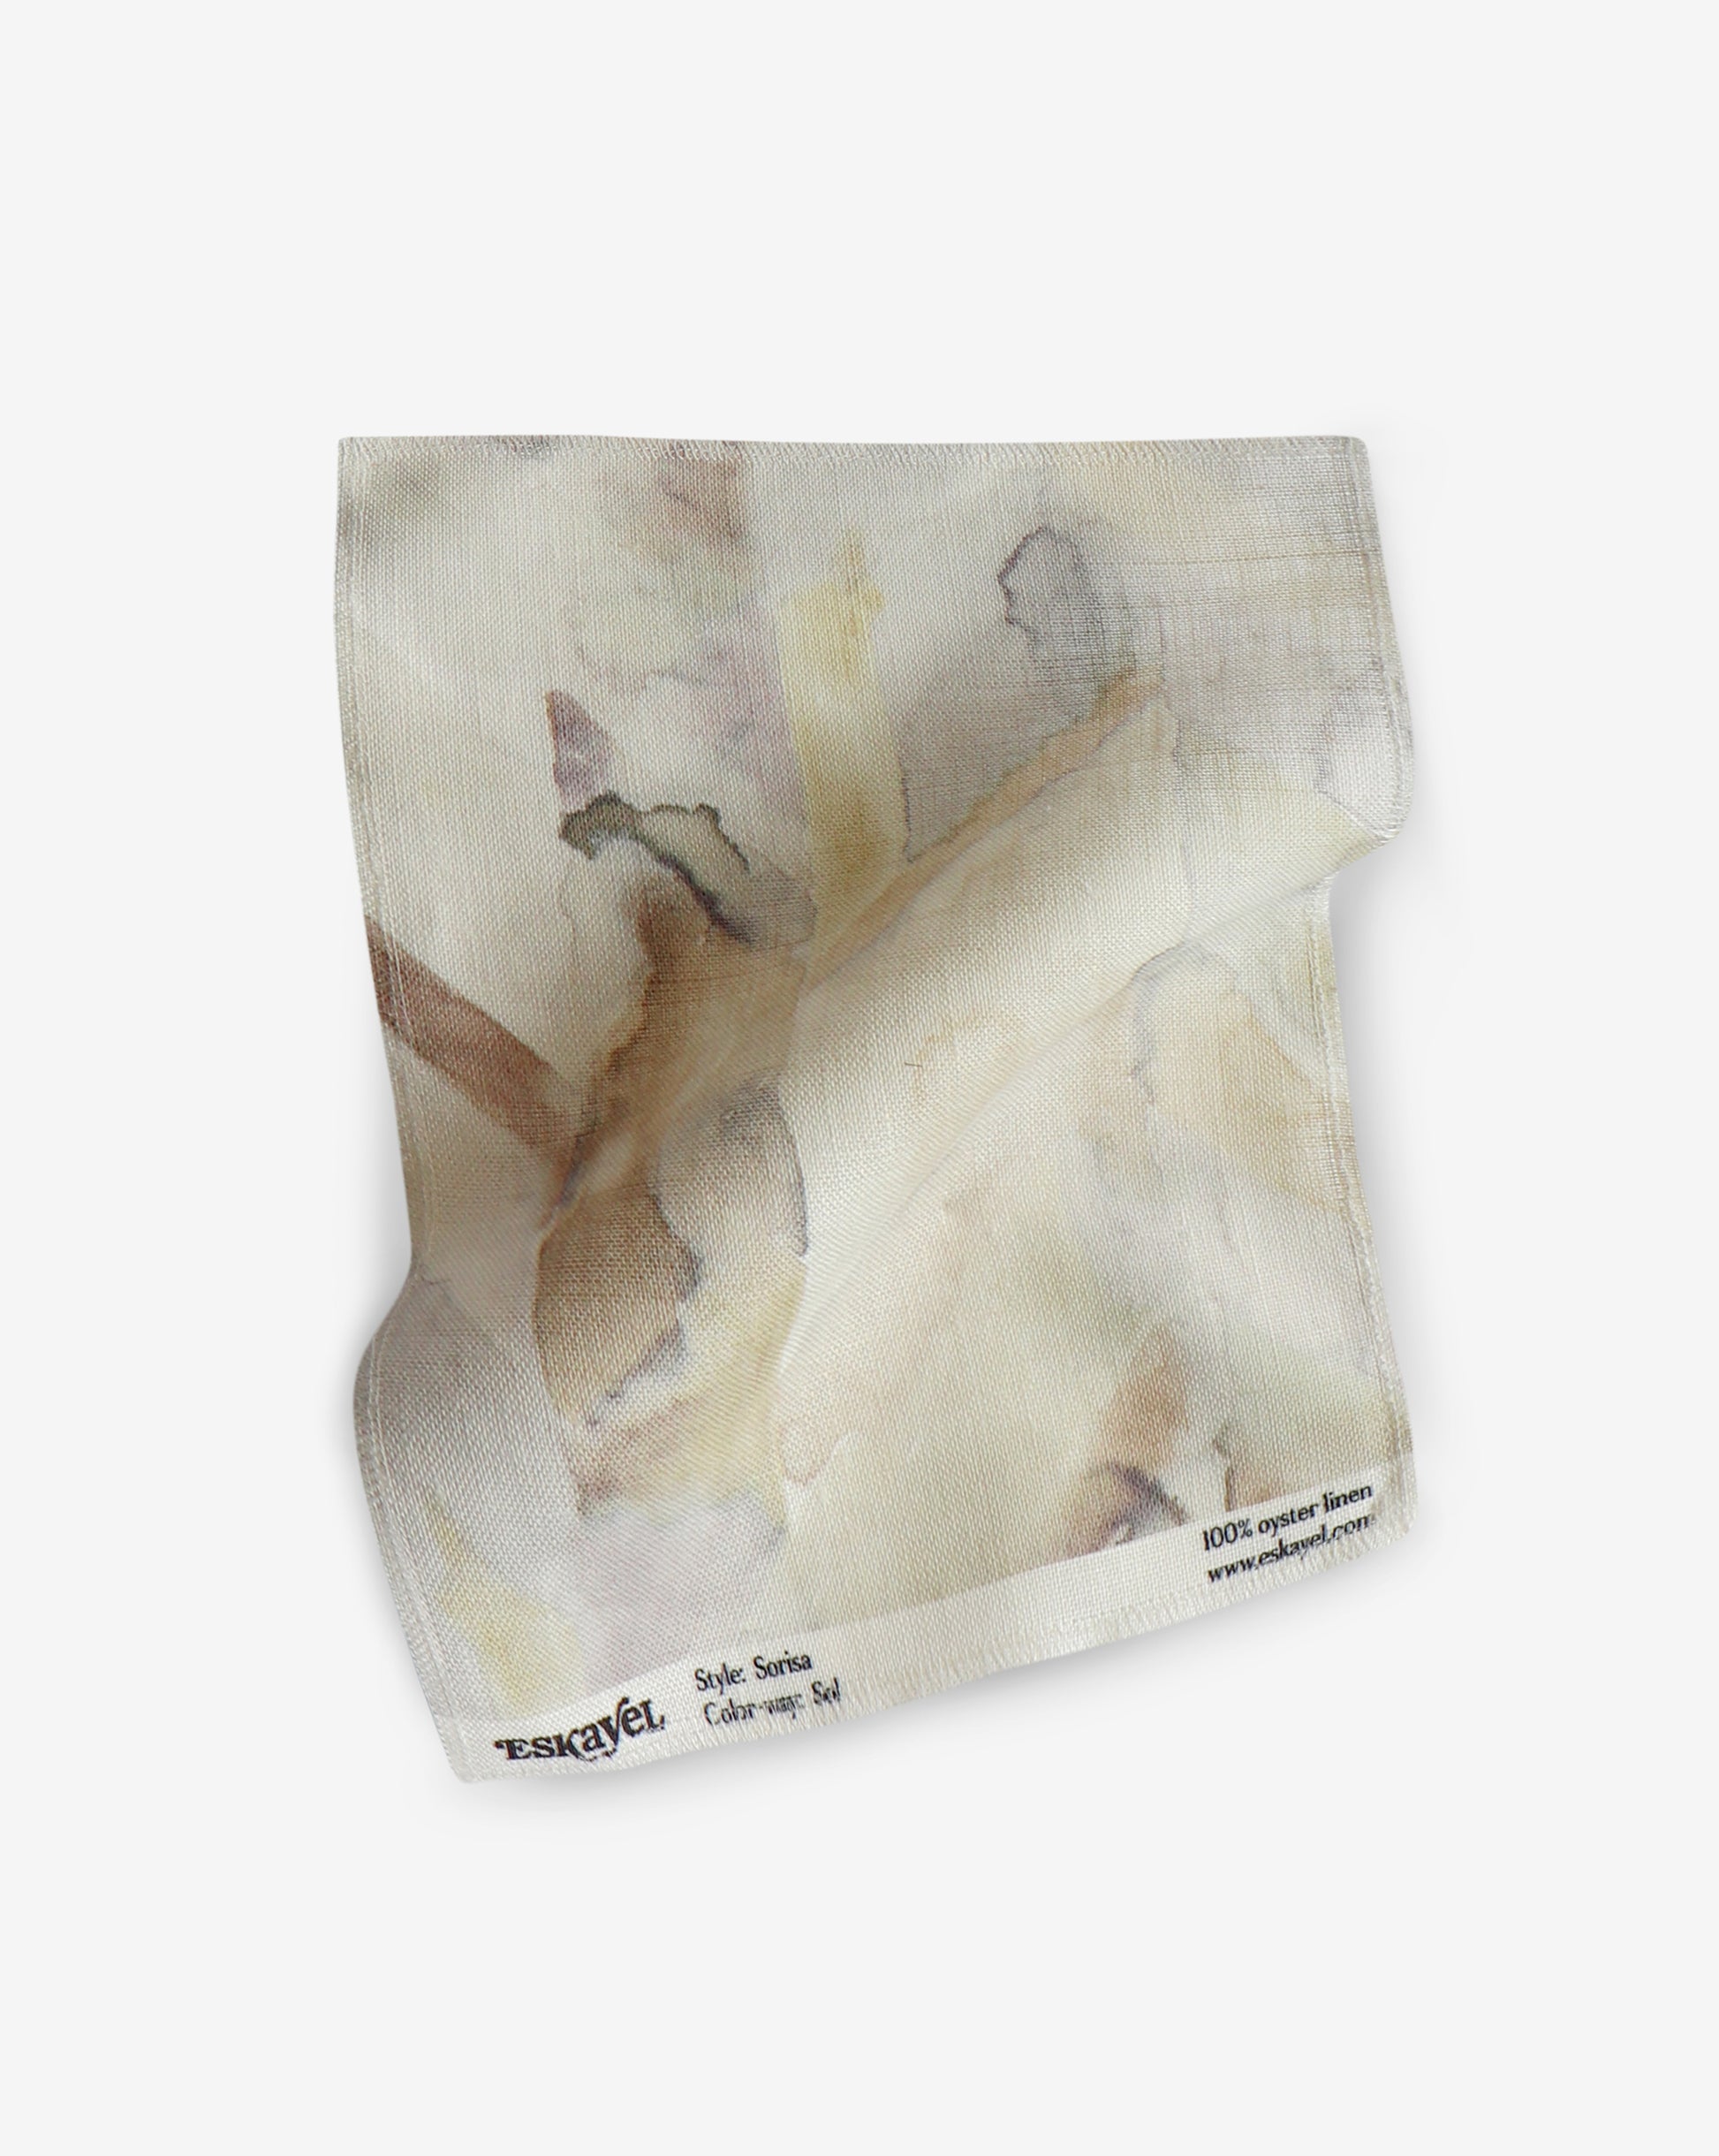 A napkin with a Sorisa Fabric Sol colorway watercolor painting on it